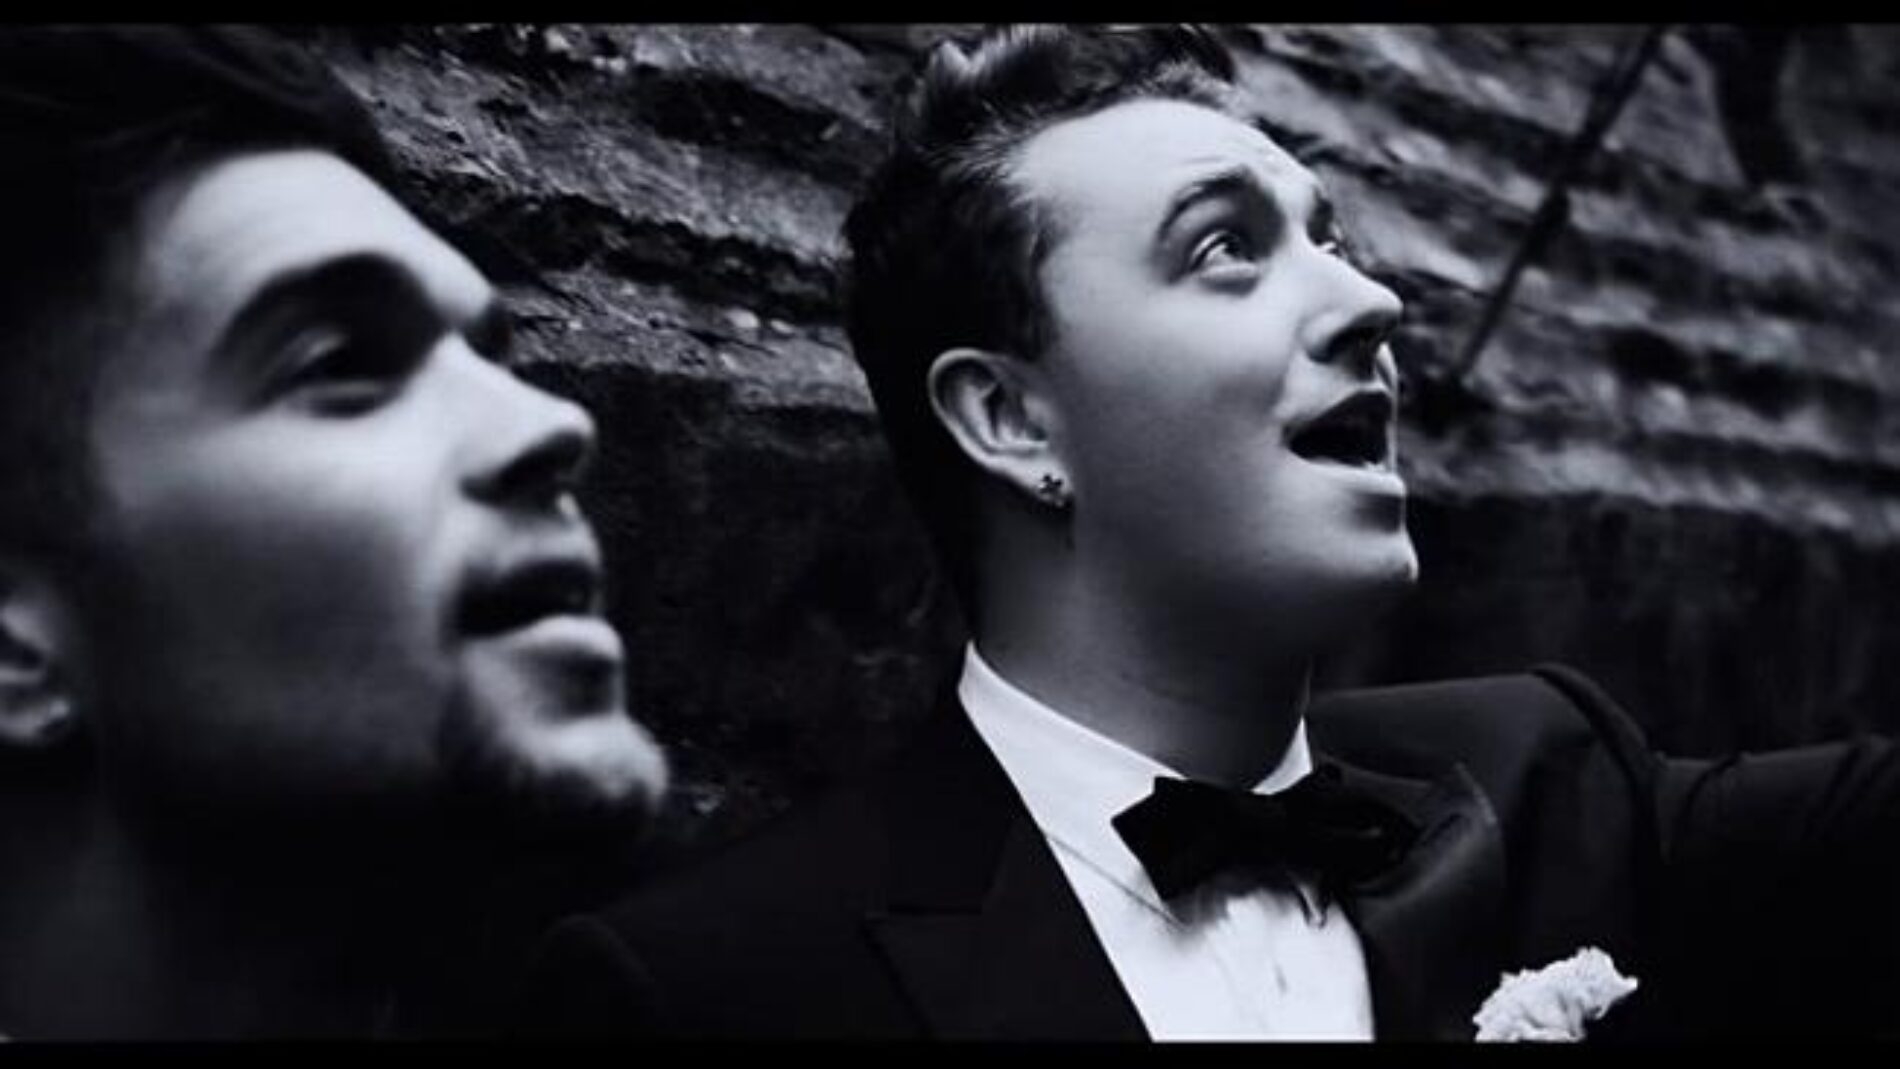 Sam Smith Doesn’t Need Grindr When He Can Have His Pick From Music Video Extras Hanging Around